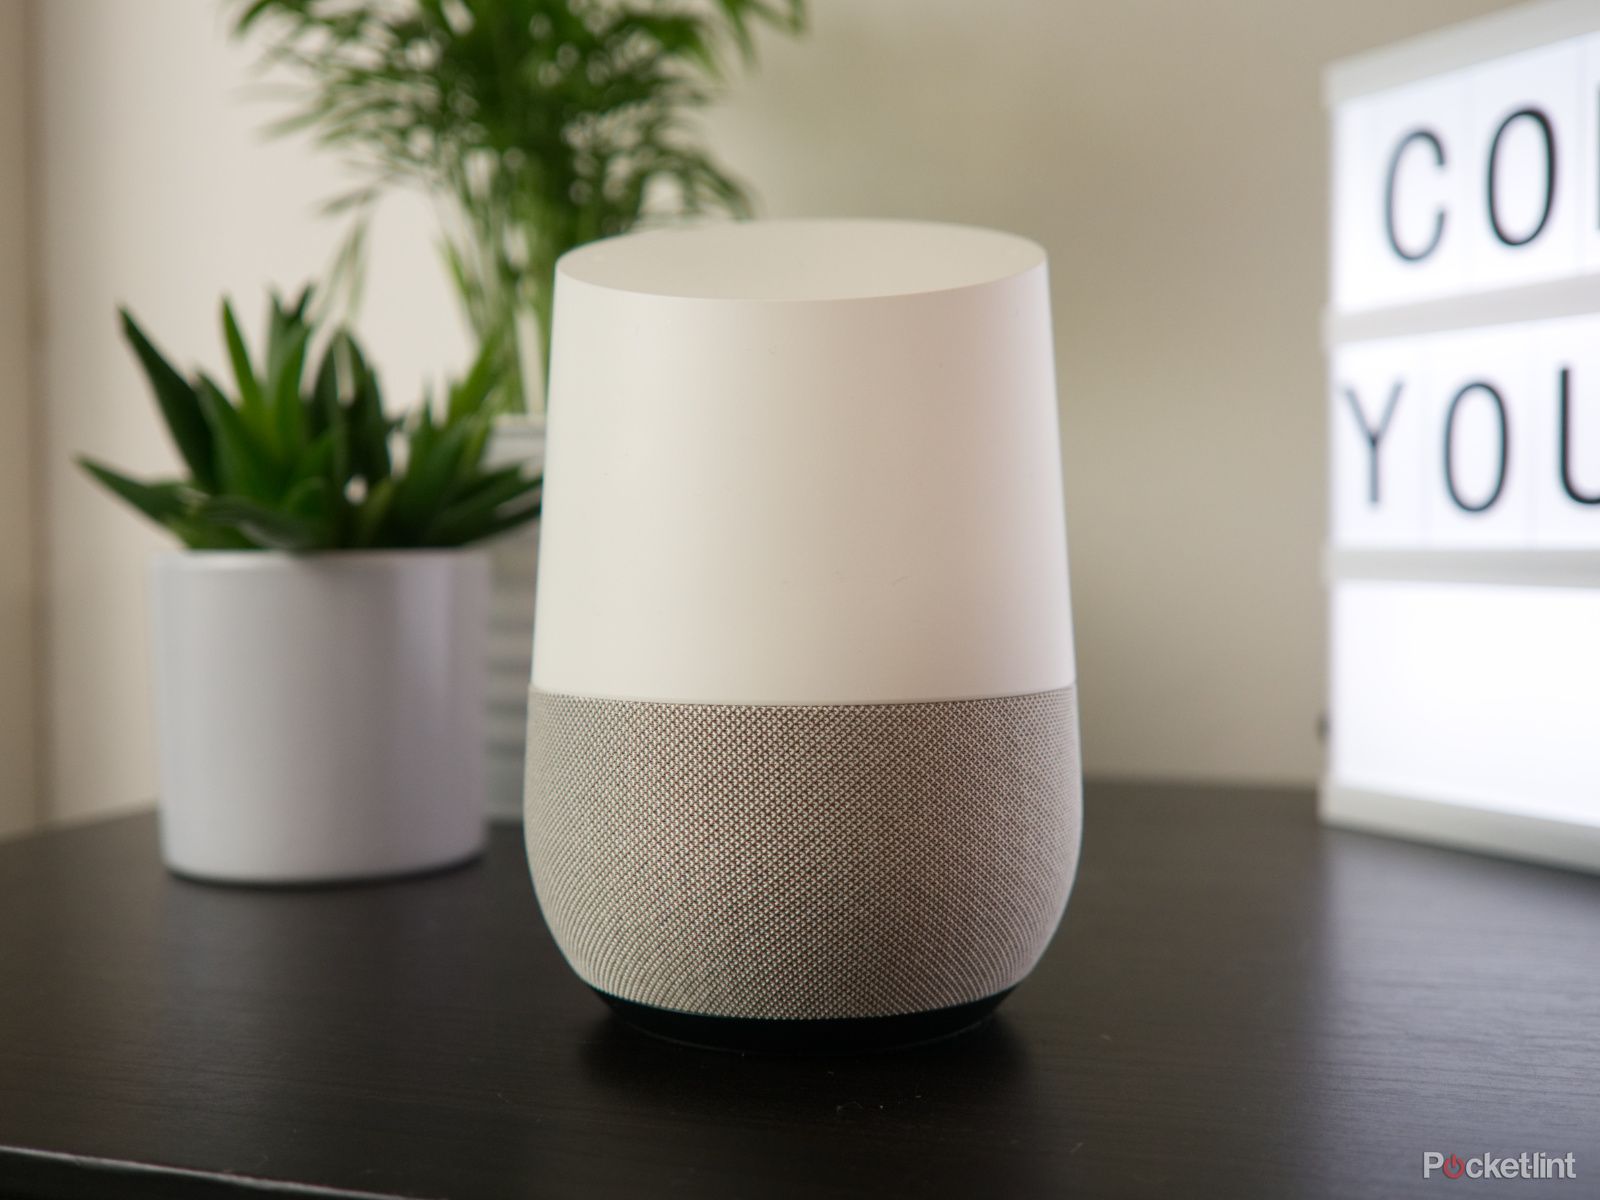 Google is set to replace Google Home with a new Nest-branded smart speaker image 1